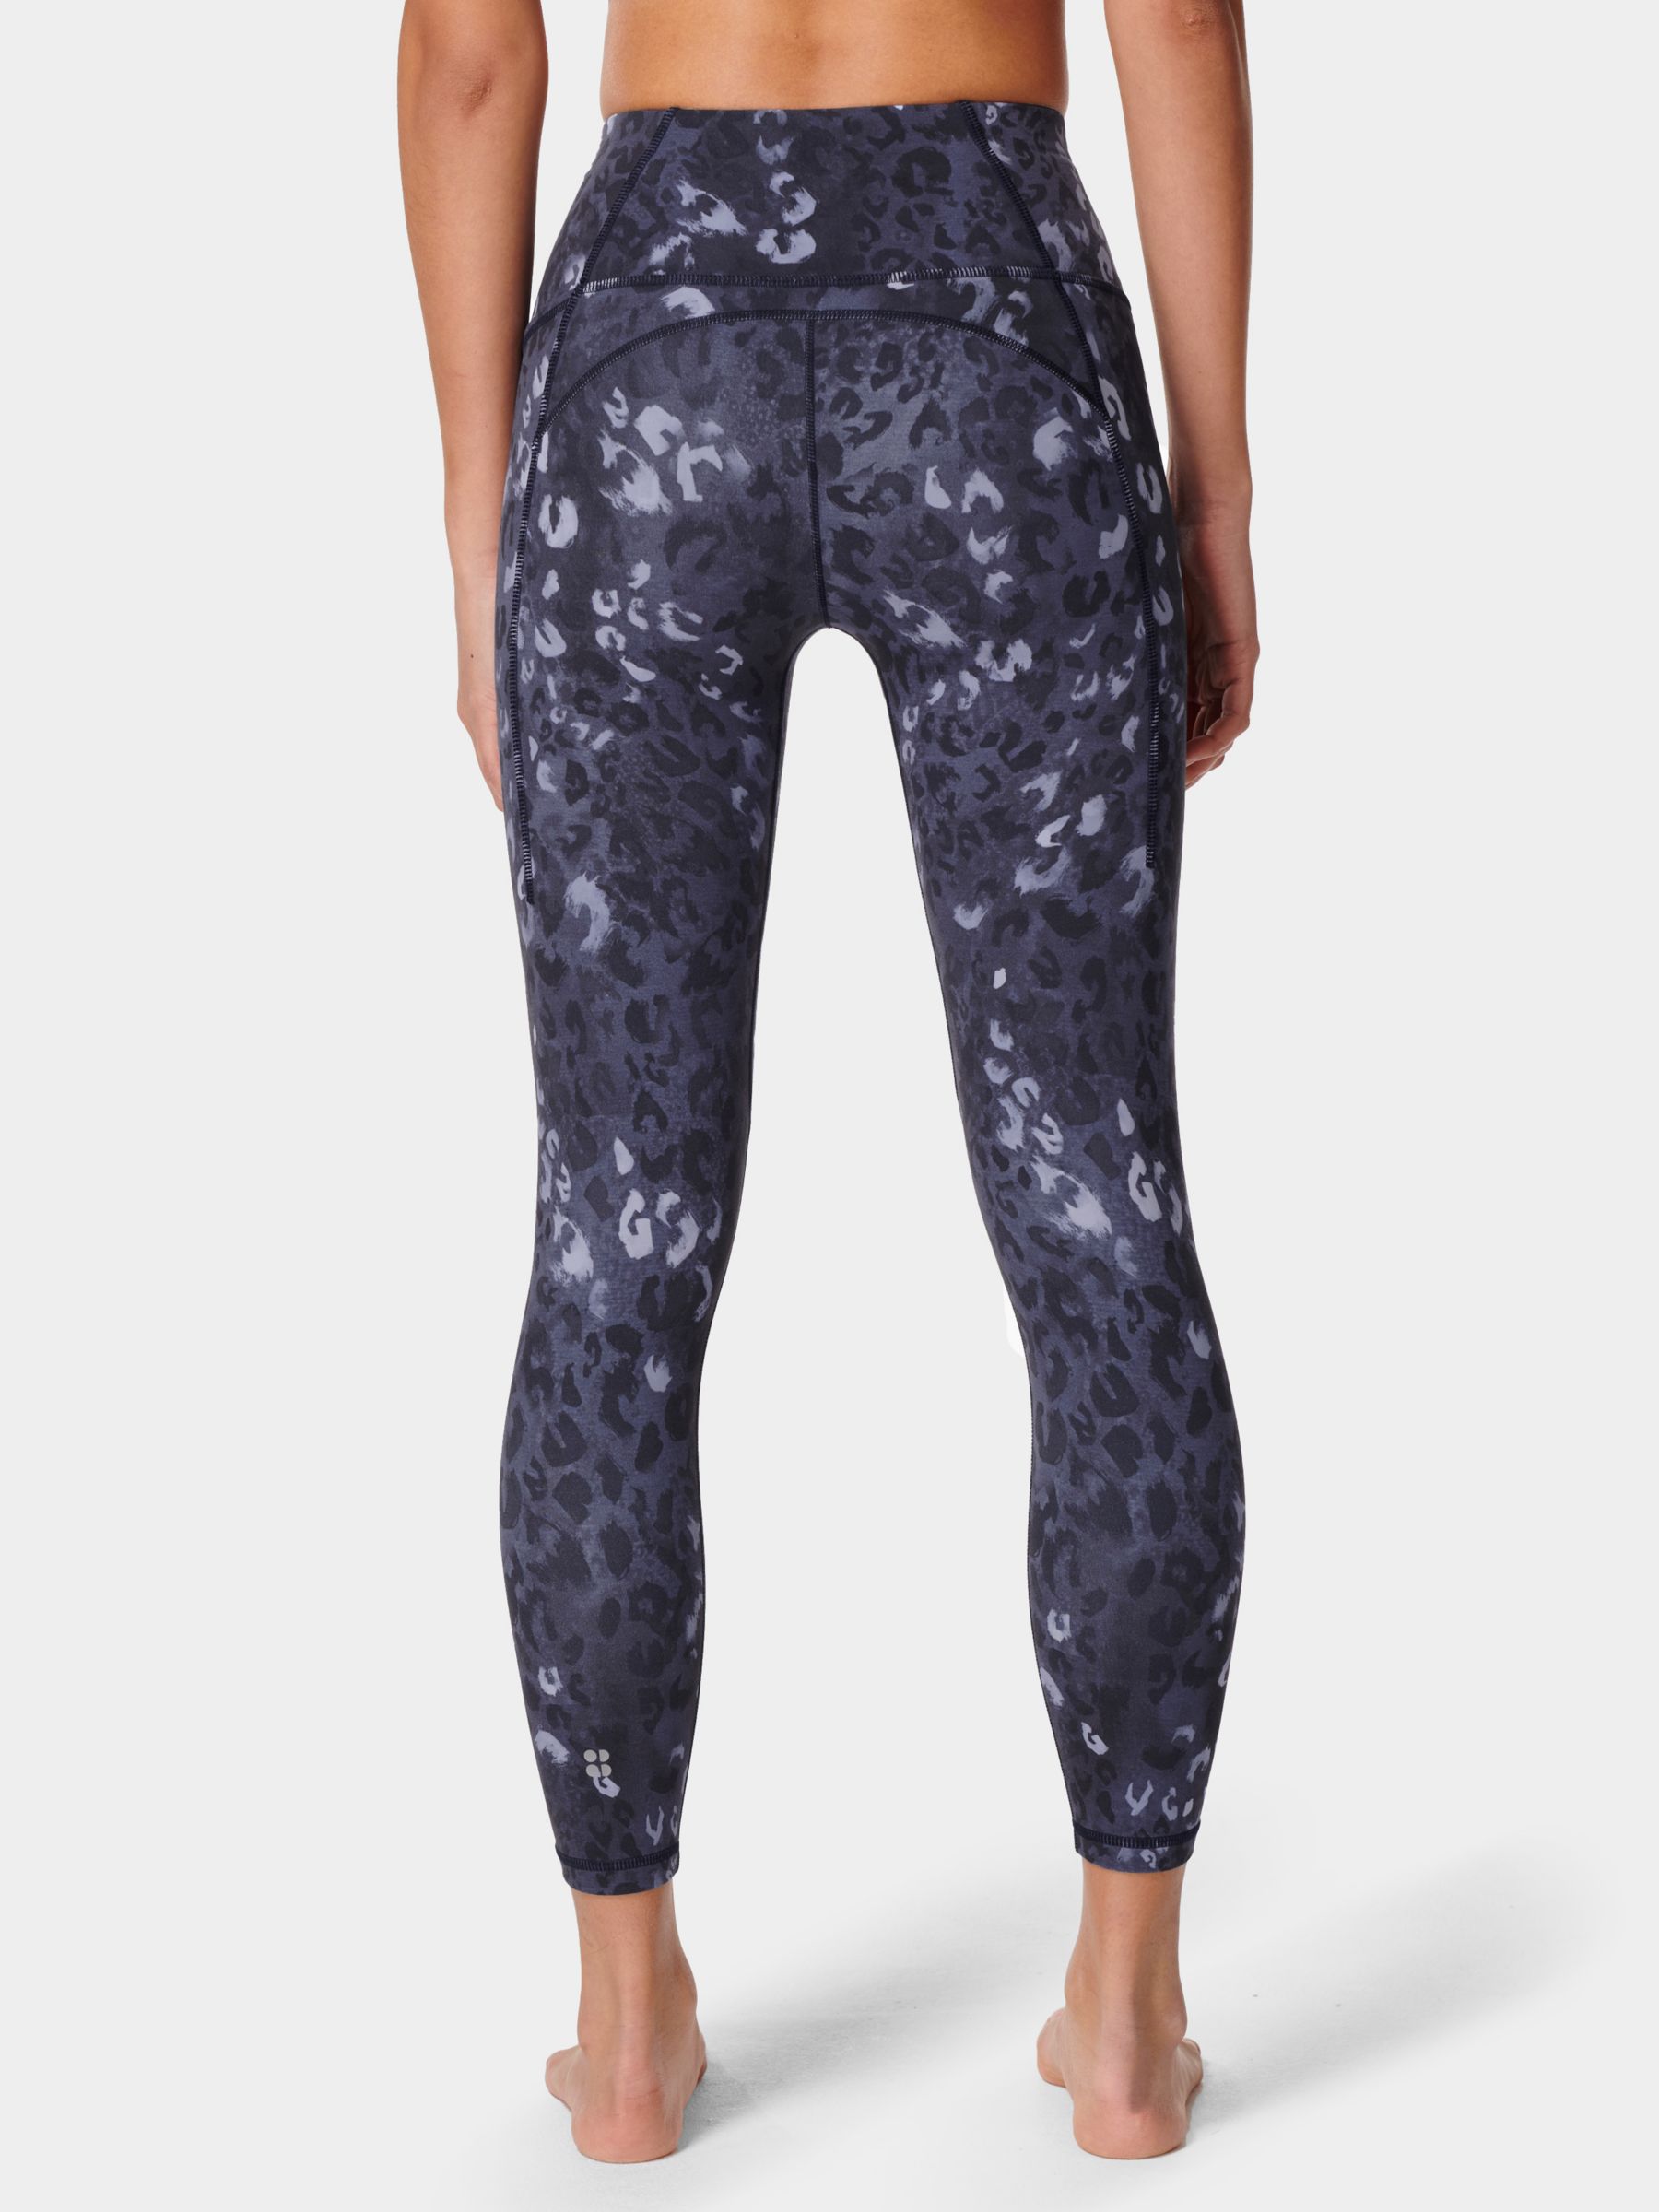 Creamy Soft Howl at the Moon Wolf Leggings